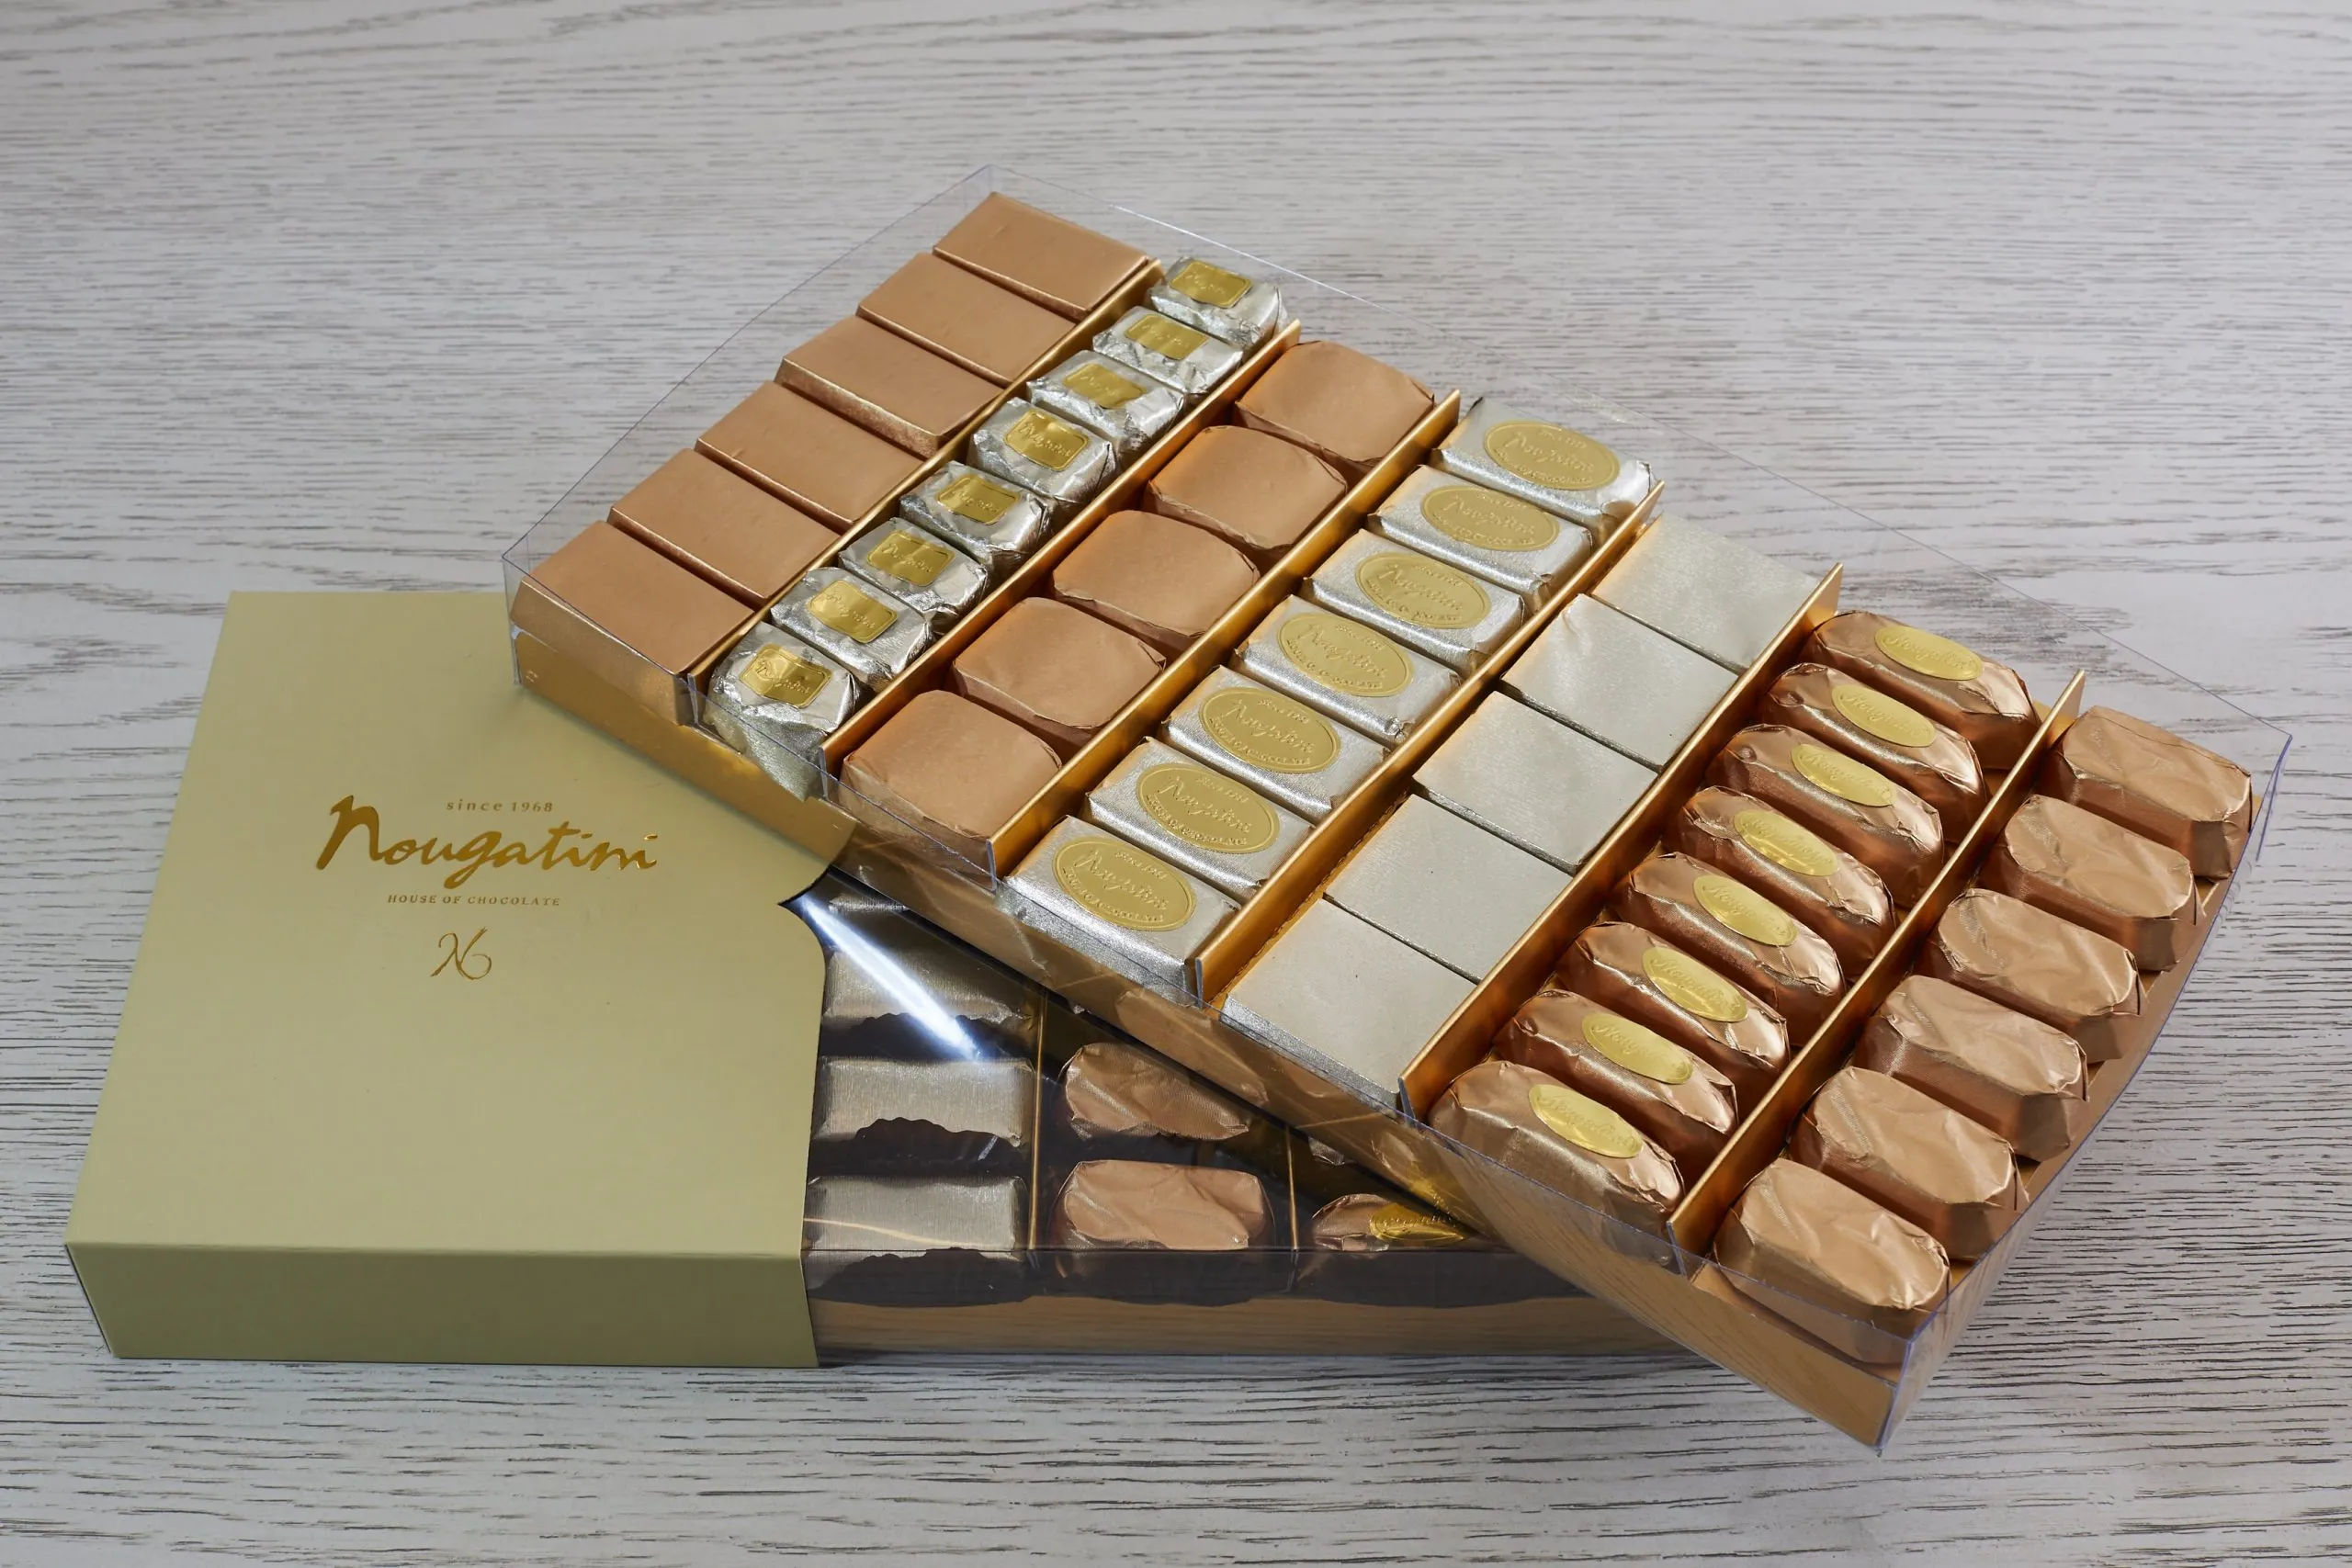 Nougatini House of Chocolate in Lebanon, middle_east | Sweets - Rated 5